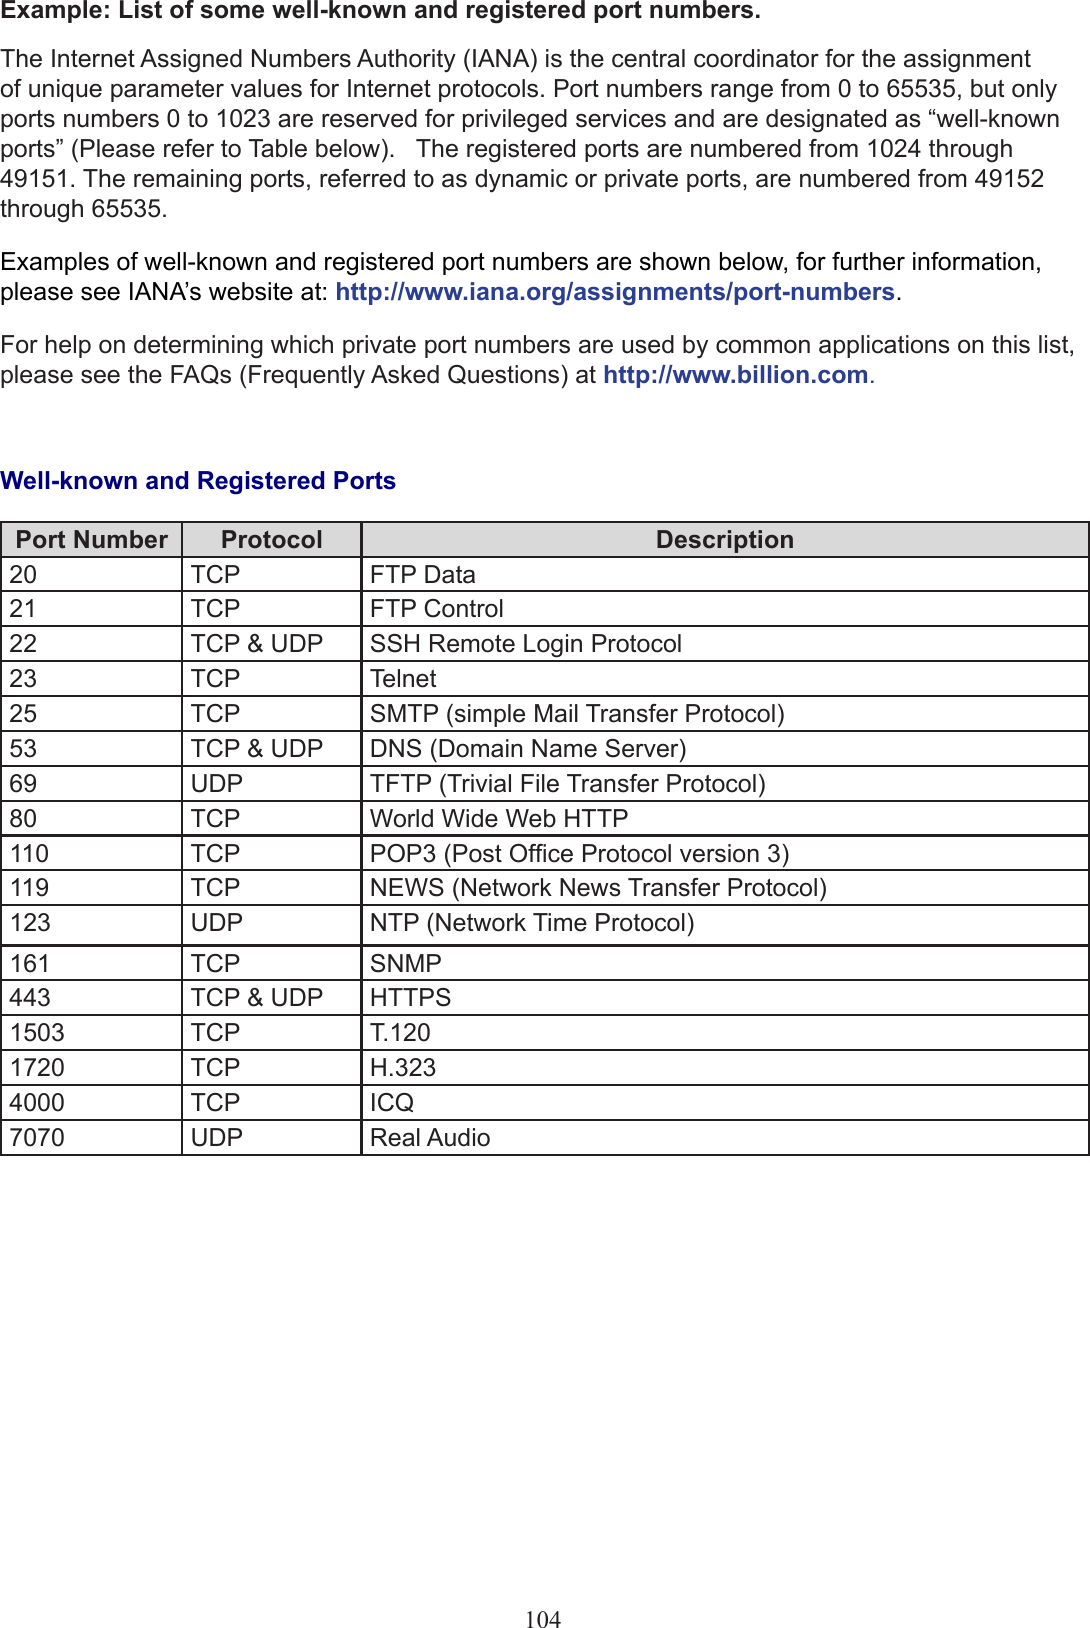 Example: List of some well-known and registered port numbers. The Internet Assigned Numbers Authority (IANA) is the central coordinator for the assignment of unique parameter values for Internet protocols. Port numbers range from 0 to 65535, but only ports numbers 0 to 1023 are reserved for privileged services and are designated as “well-known ports” (Please refer to Table below).   The registered ports are numbered from 1024 through 49151. The remaining ports, referred to as dynamic or private ports, are numbered from 49152 through 65535.Examples of well-known and registered port numbers are shown below, for further information, please see IANA’s website at: http://www.iana.org/assignments/port-numbers.For help on determining which private port numbers are used by common applications on this list, please see the FAQs (Frequently Asked Questions) at http://www.billion.com.Well-known and Registered PortsPort Number Protocol Description20 TCP FTP Data21 TCP FTP Control22 TCP &amp; UDP SSH Remote Login Protocol23 TCP Telnet25 TCP SMTP (simple Mail Transfer Protocol)53 TCP &amp; UDP DNS (Domain Name Server)69 UDP TFTP (Trivial File Transfer Protocol)80 TCP World Wide Web HTTP110 TCP POP3 (Post Ofce Protocol version 3)119 TCP NEWS (Network News Transfer Protocol)123 UDP NTP (Network Time Protocol)161 TCP SNMP443 TCP &amp; UDP HTTPS1503 TCP T.1201720 TCP H.3234000 TCP ICQ7070 UDP Real Audio104